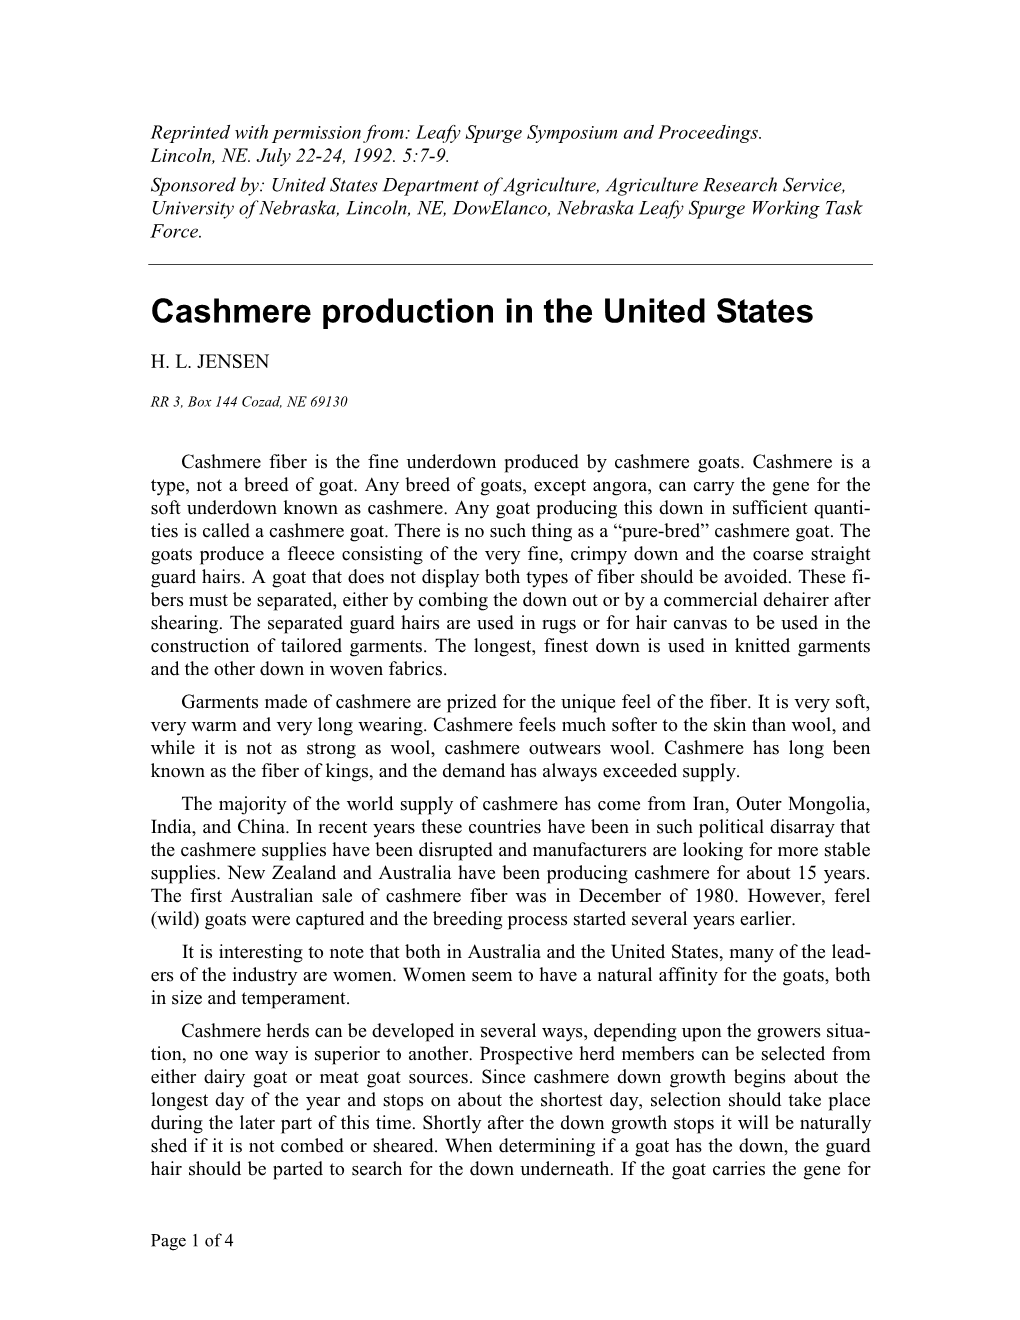 Cashmere Production in the United States